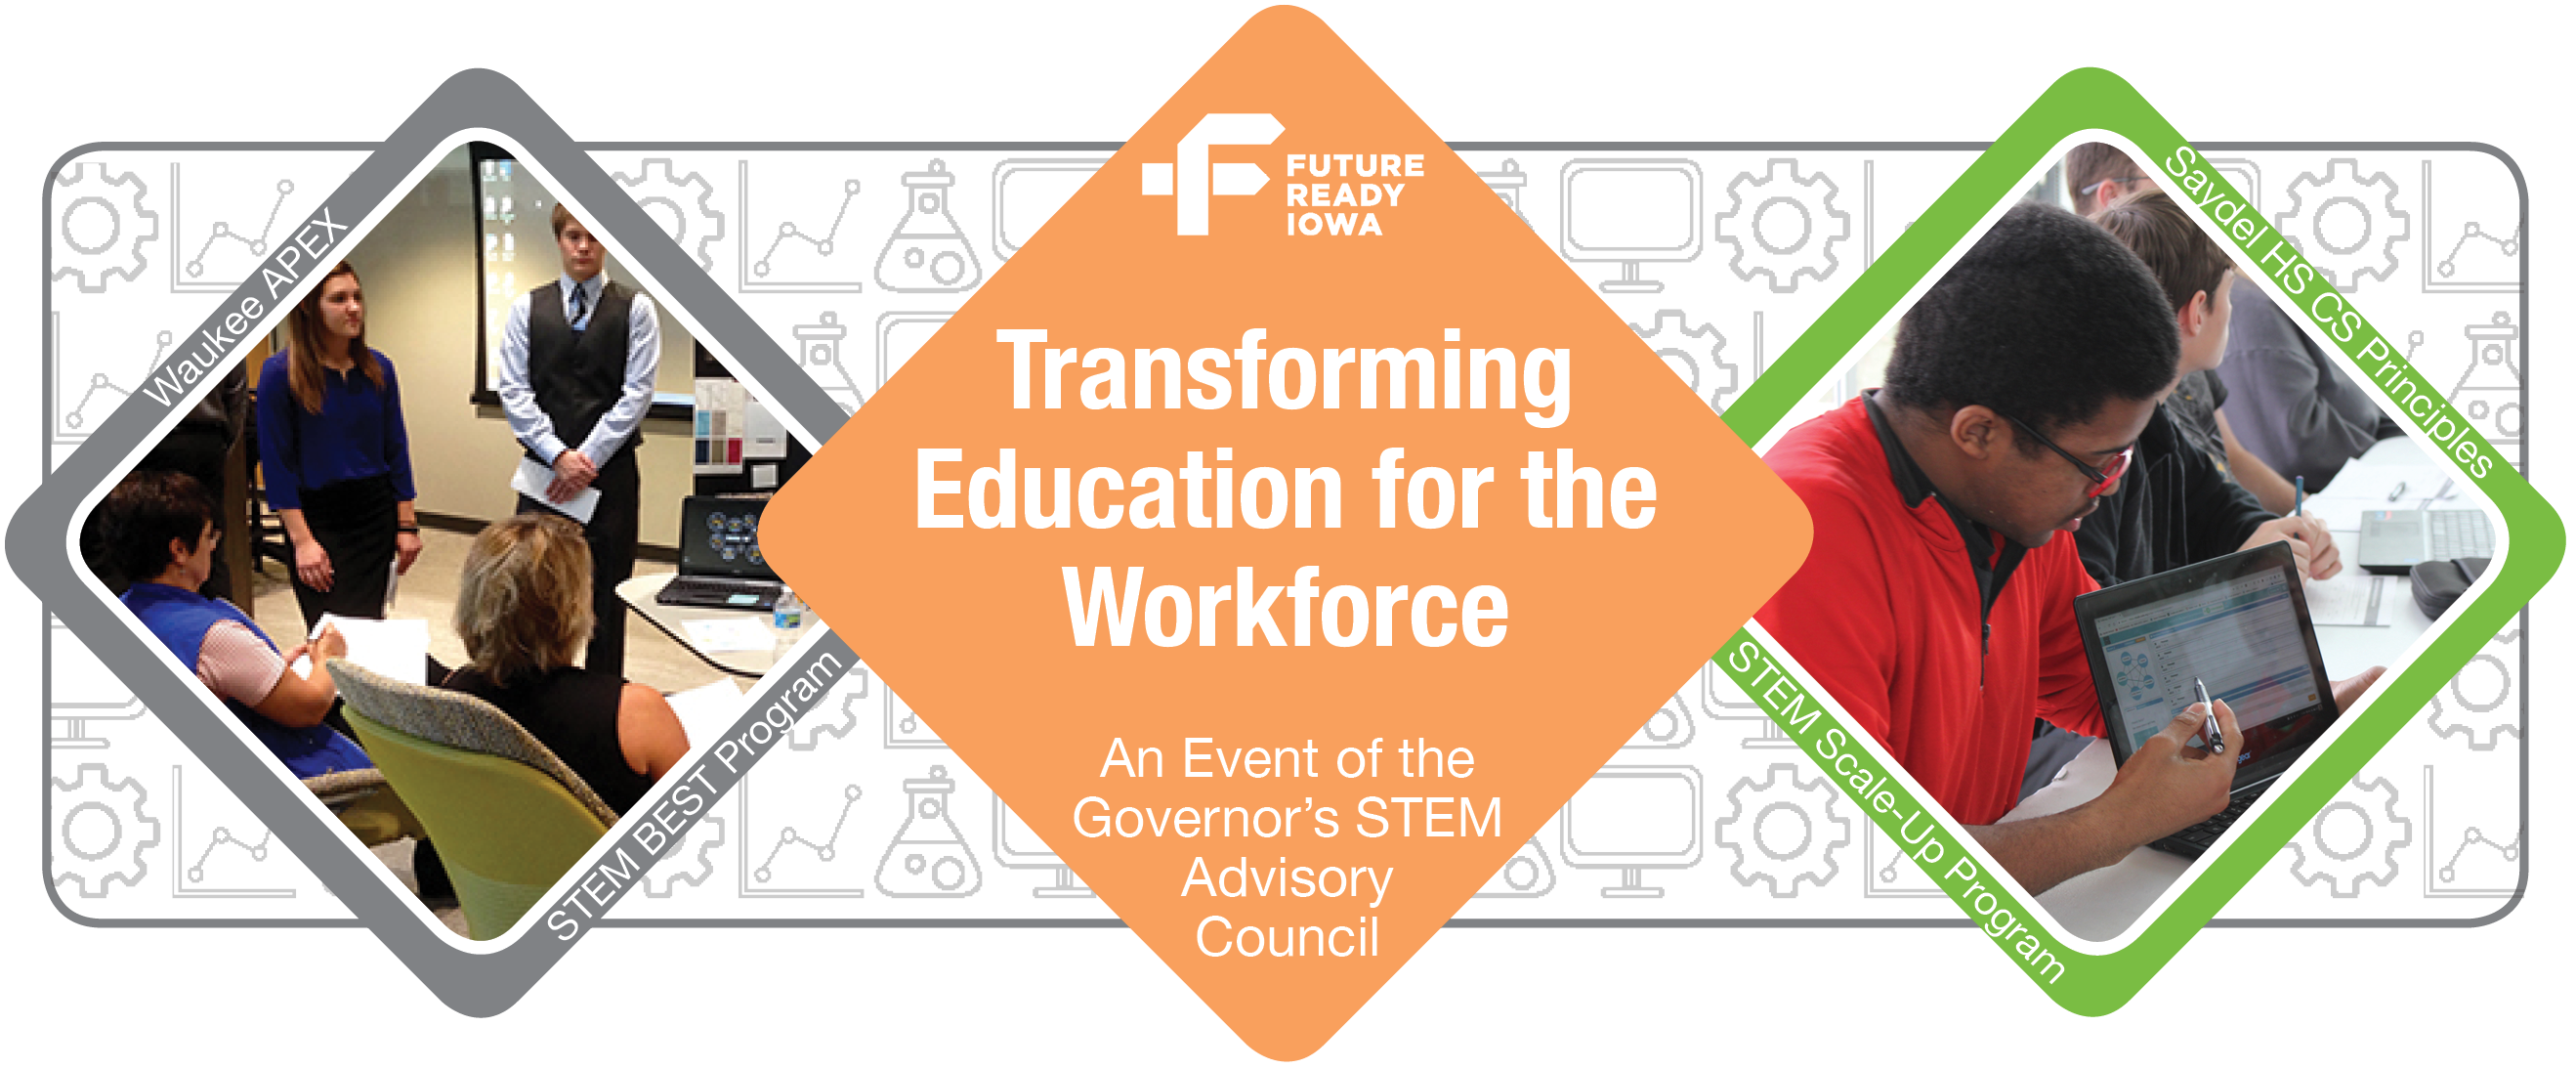 Registration is now open for the Transforming Education for the Workforce Summit.